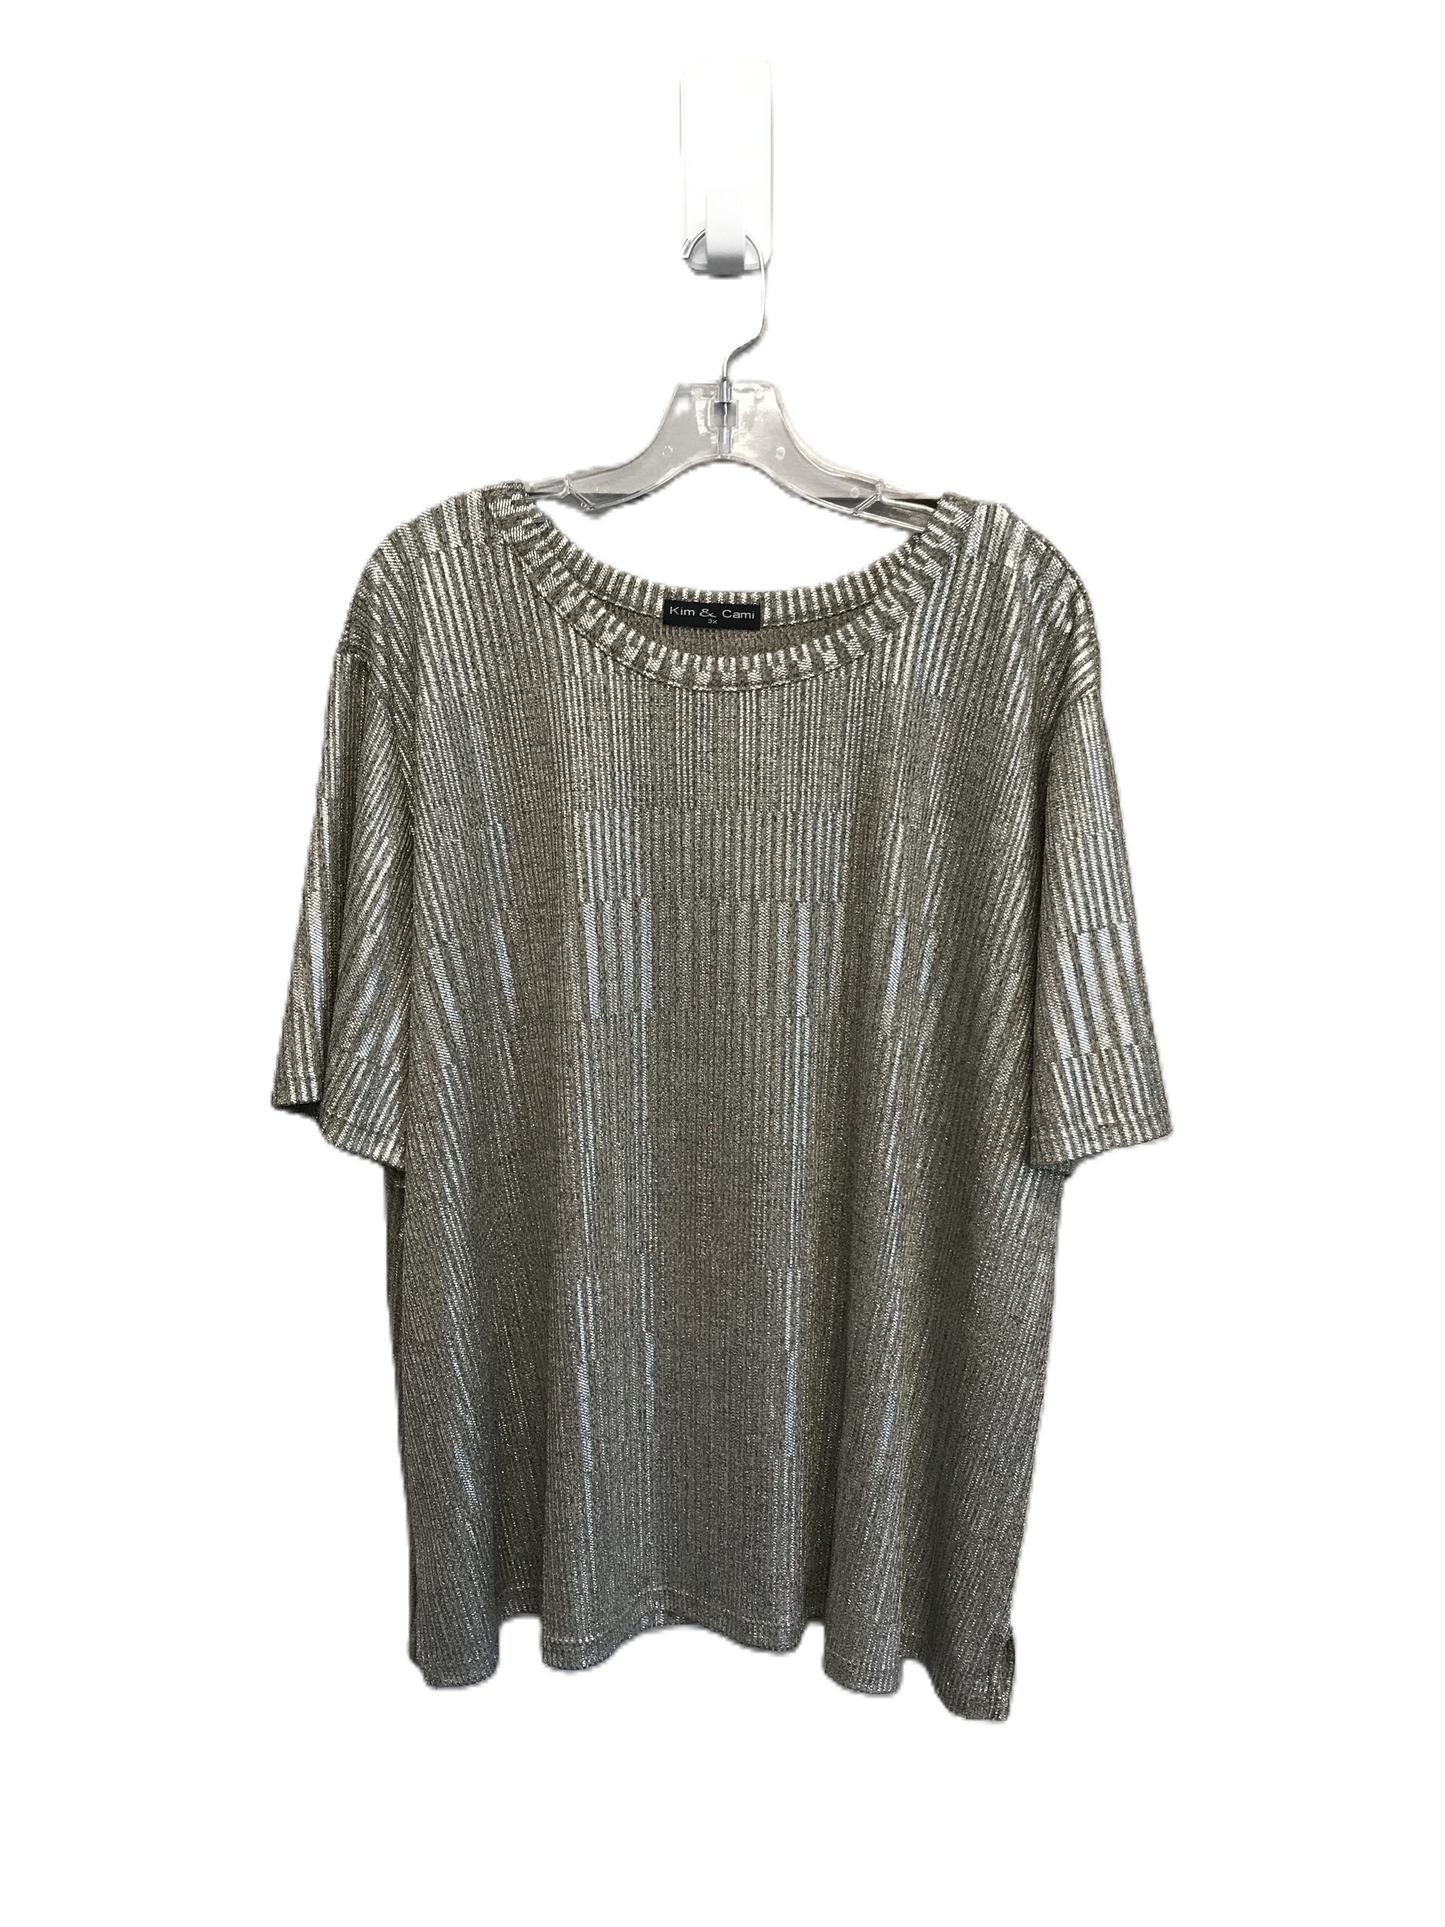 Gold Top Short Sleeve By Kim & Cami, Size: 3x